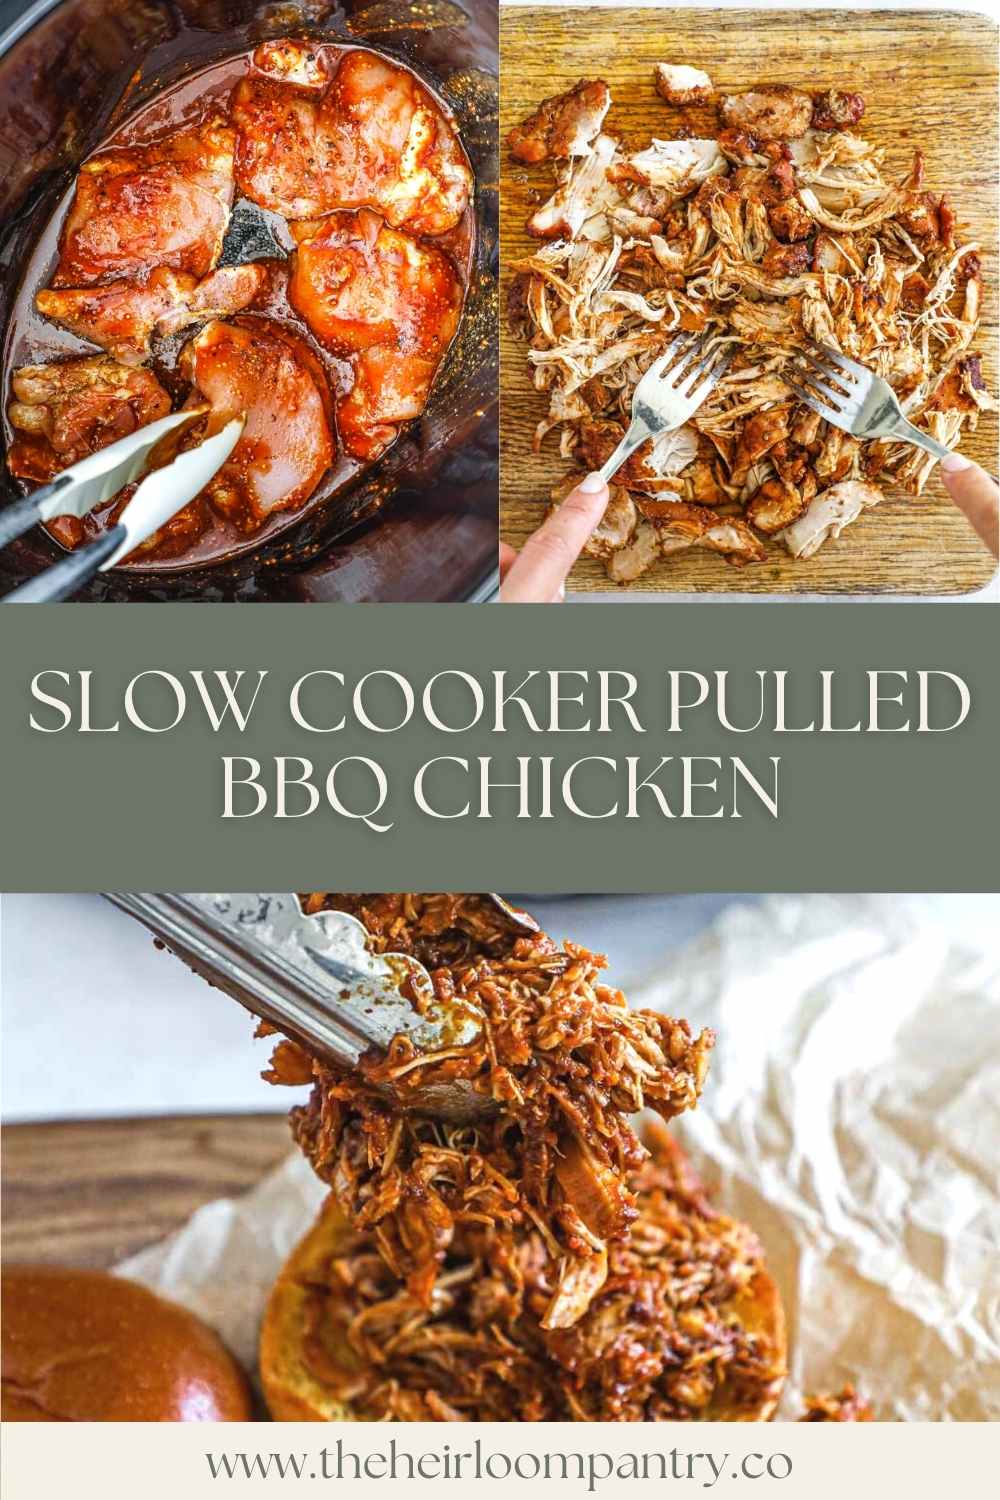 Slow cooker pulled BBQ chicken thighs Pinterest pin.